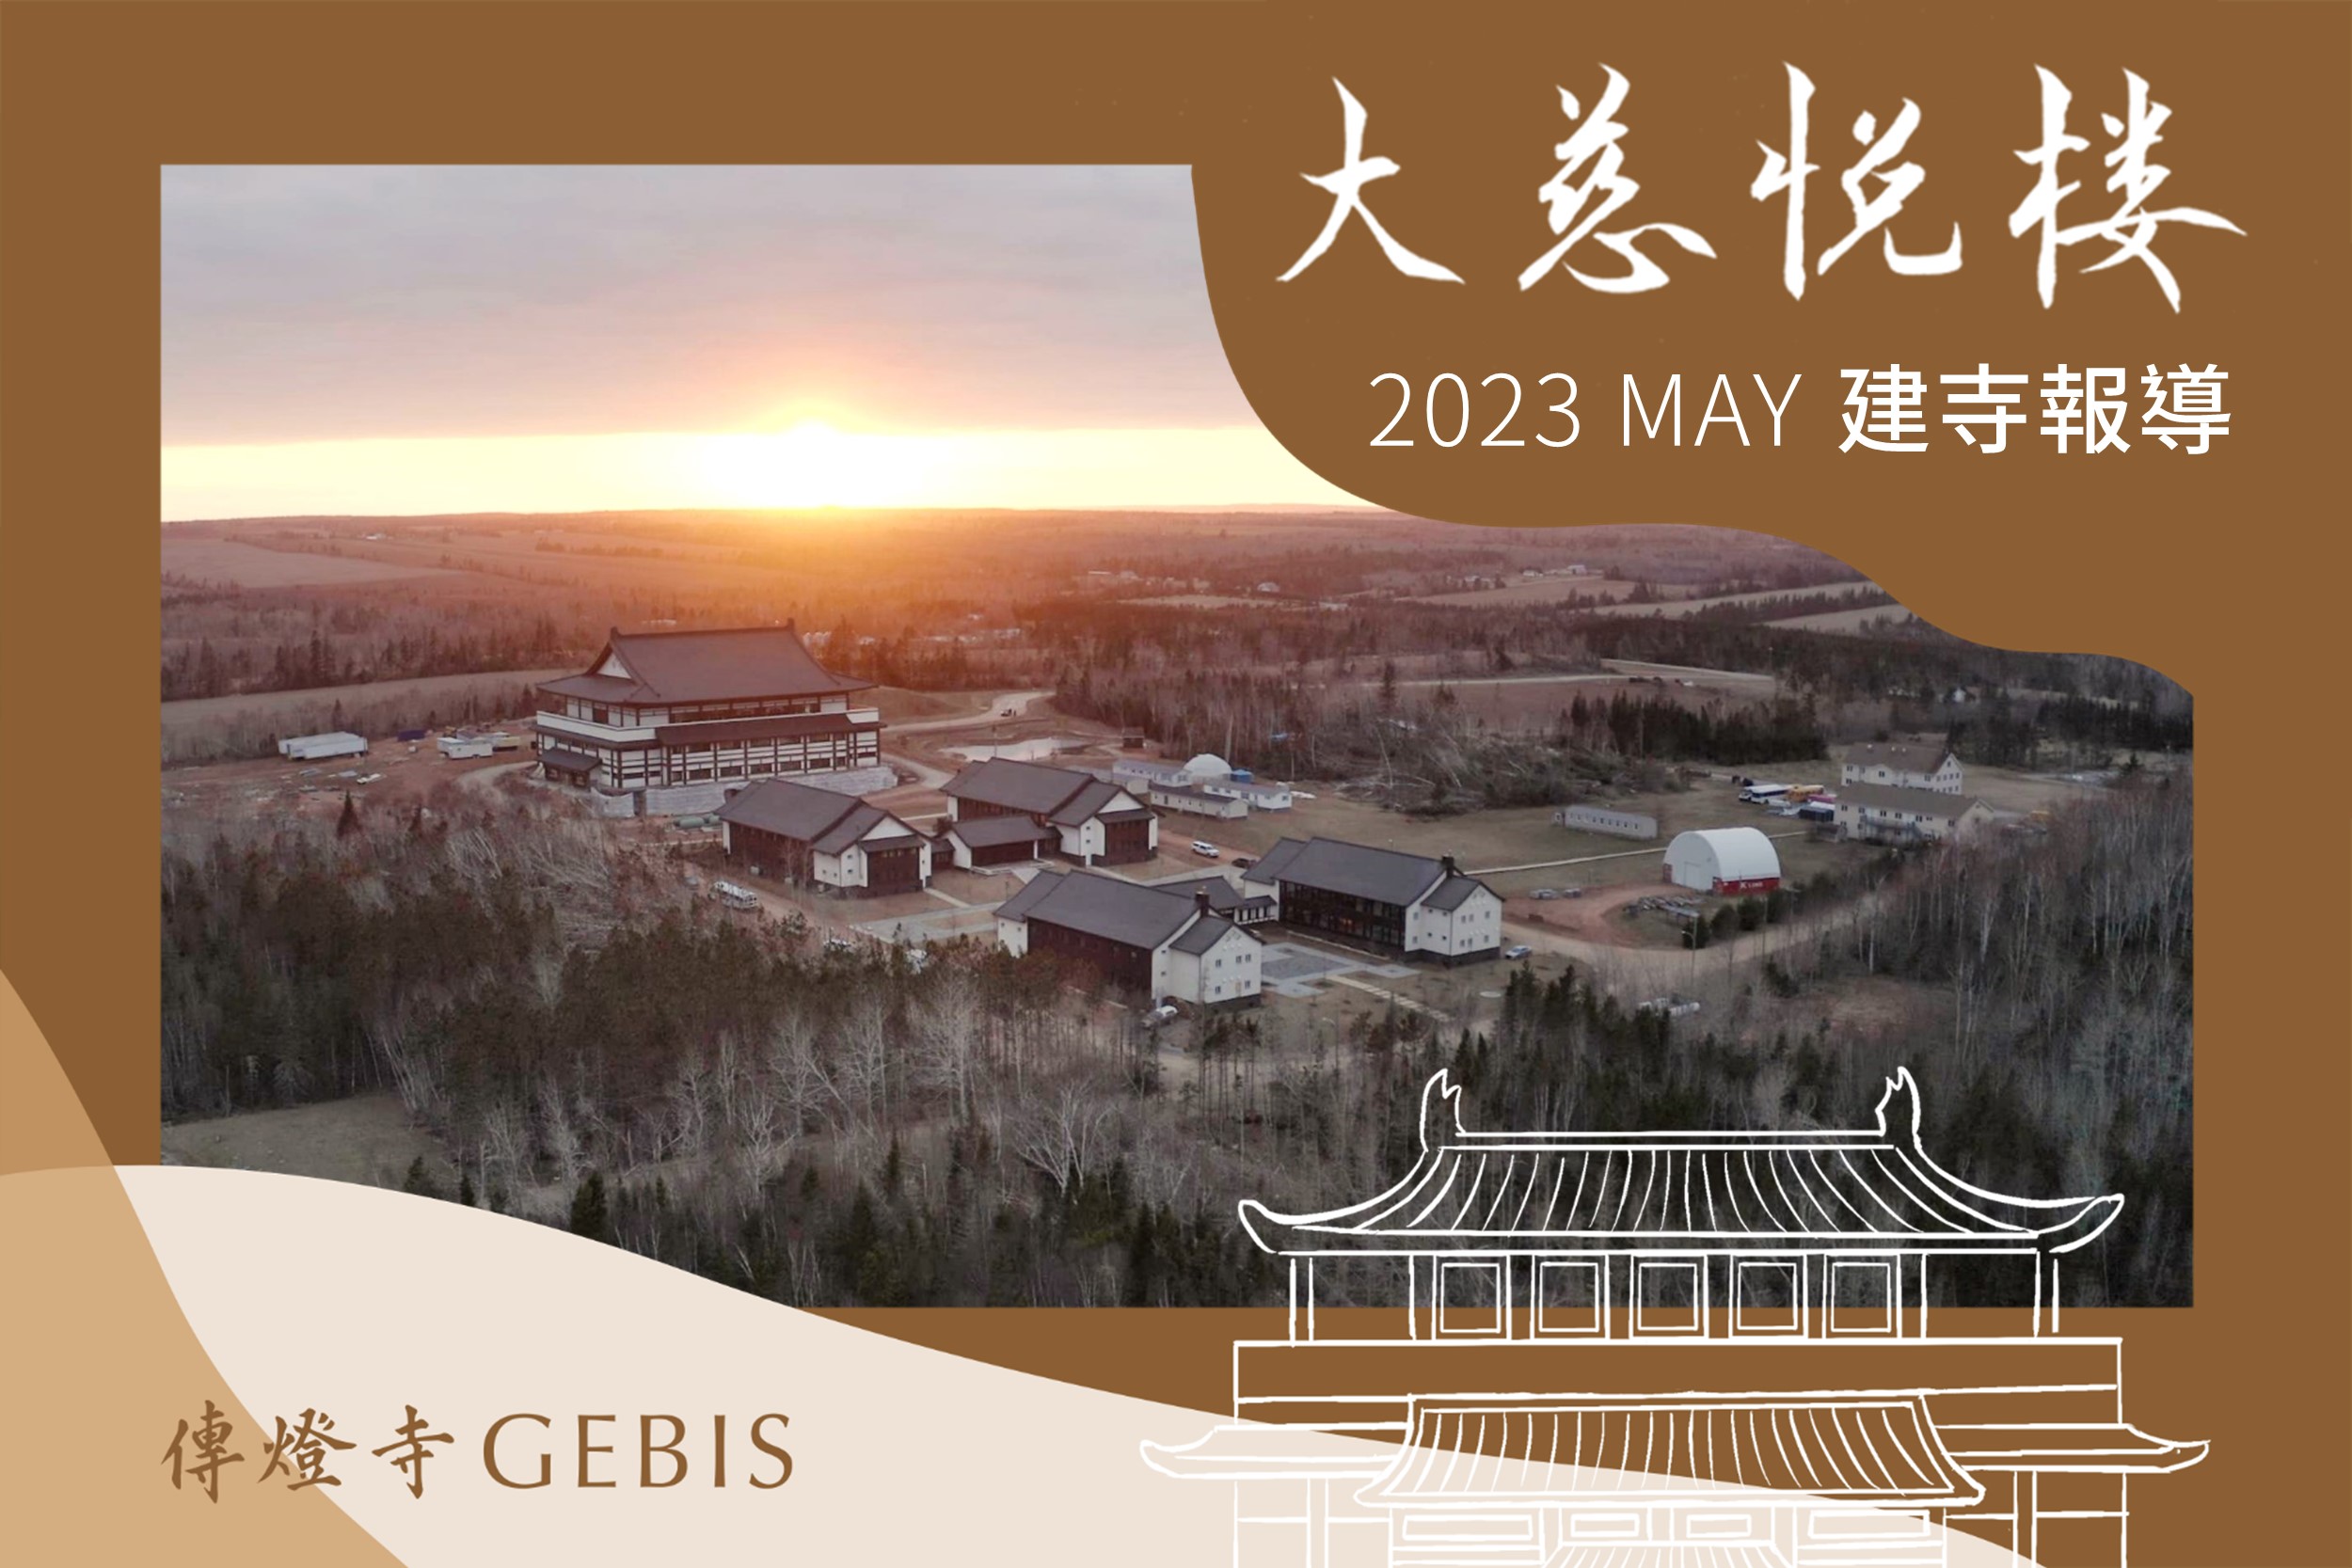 You are currently viewing 傳燈寺大慈悅樓：2023年5月建寺報導